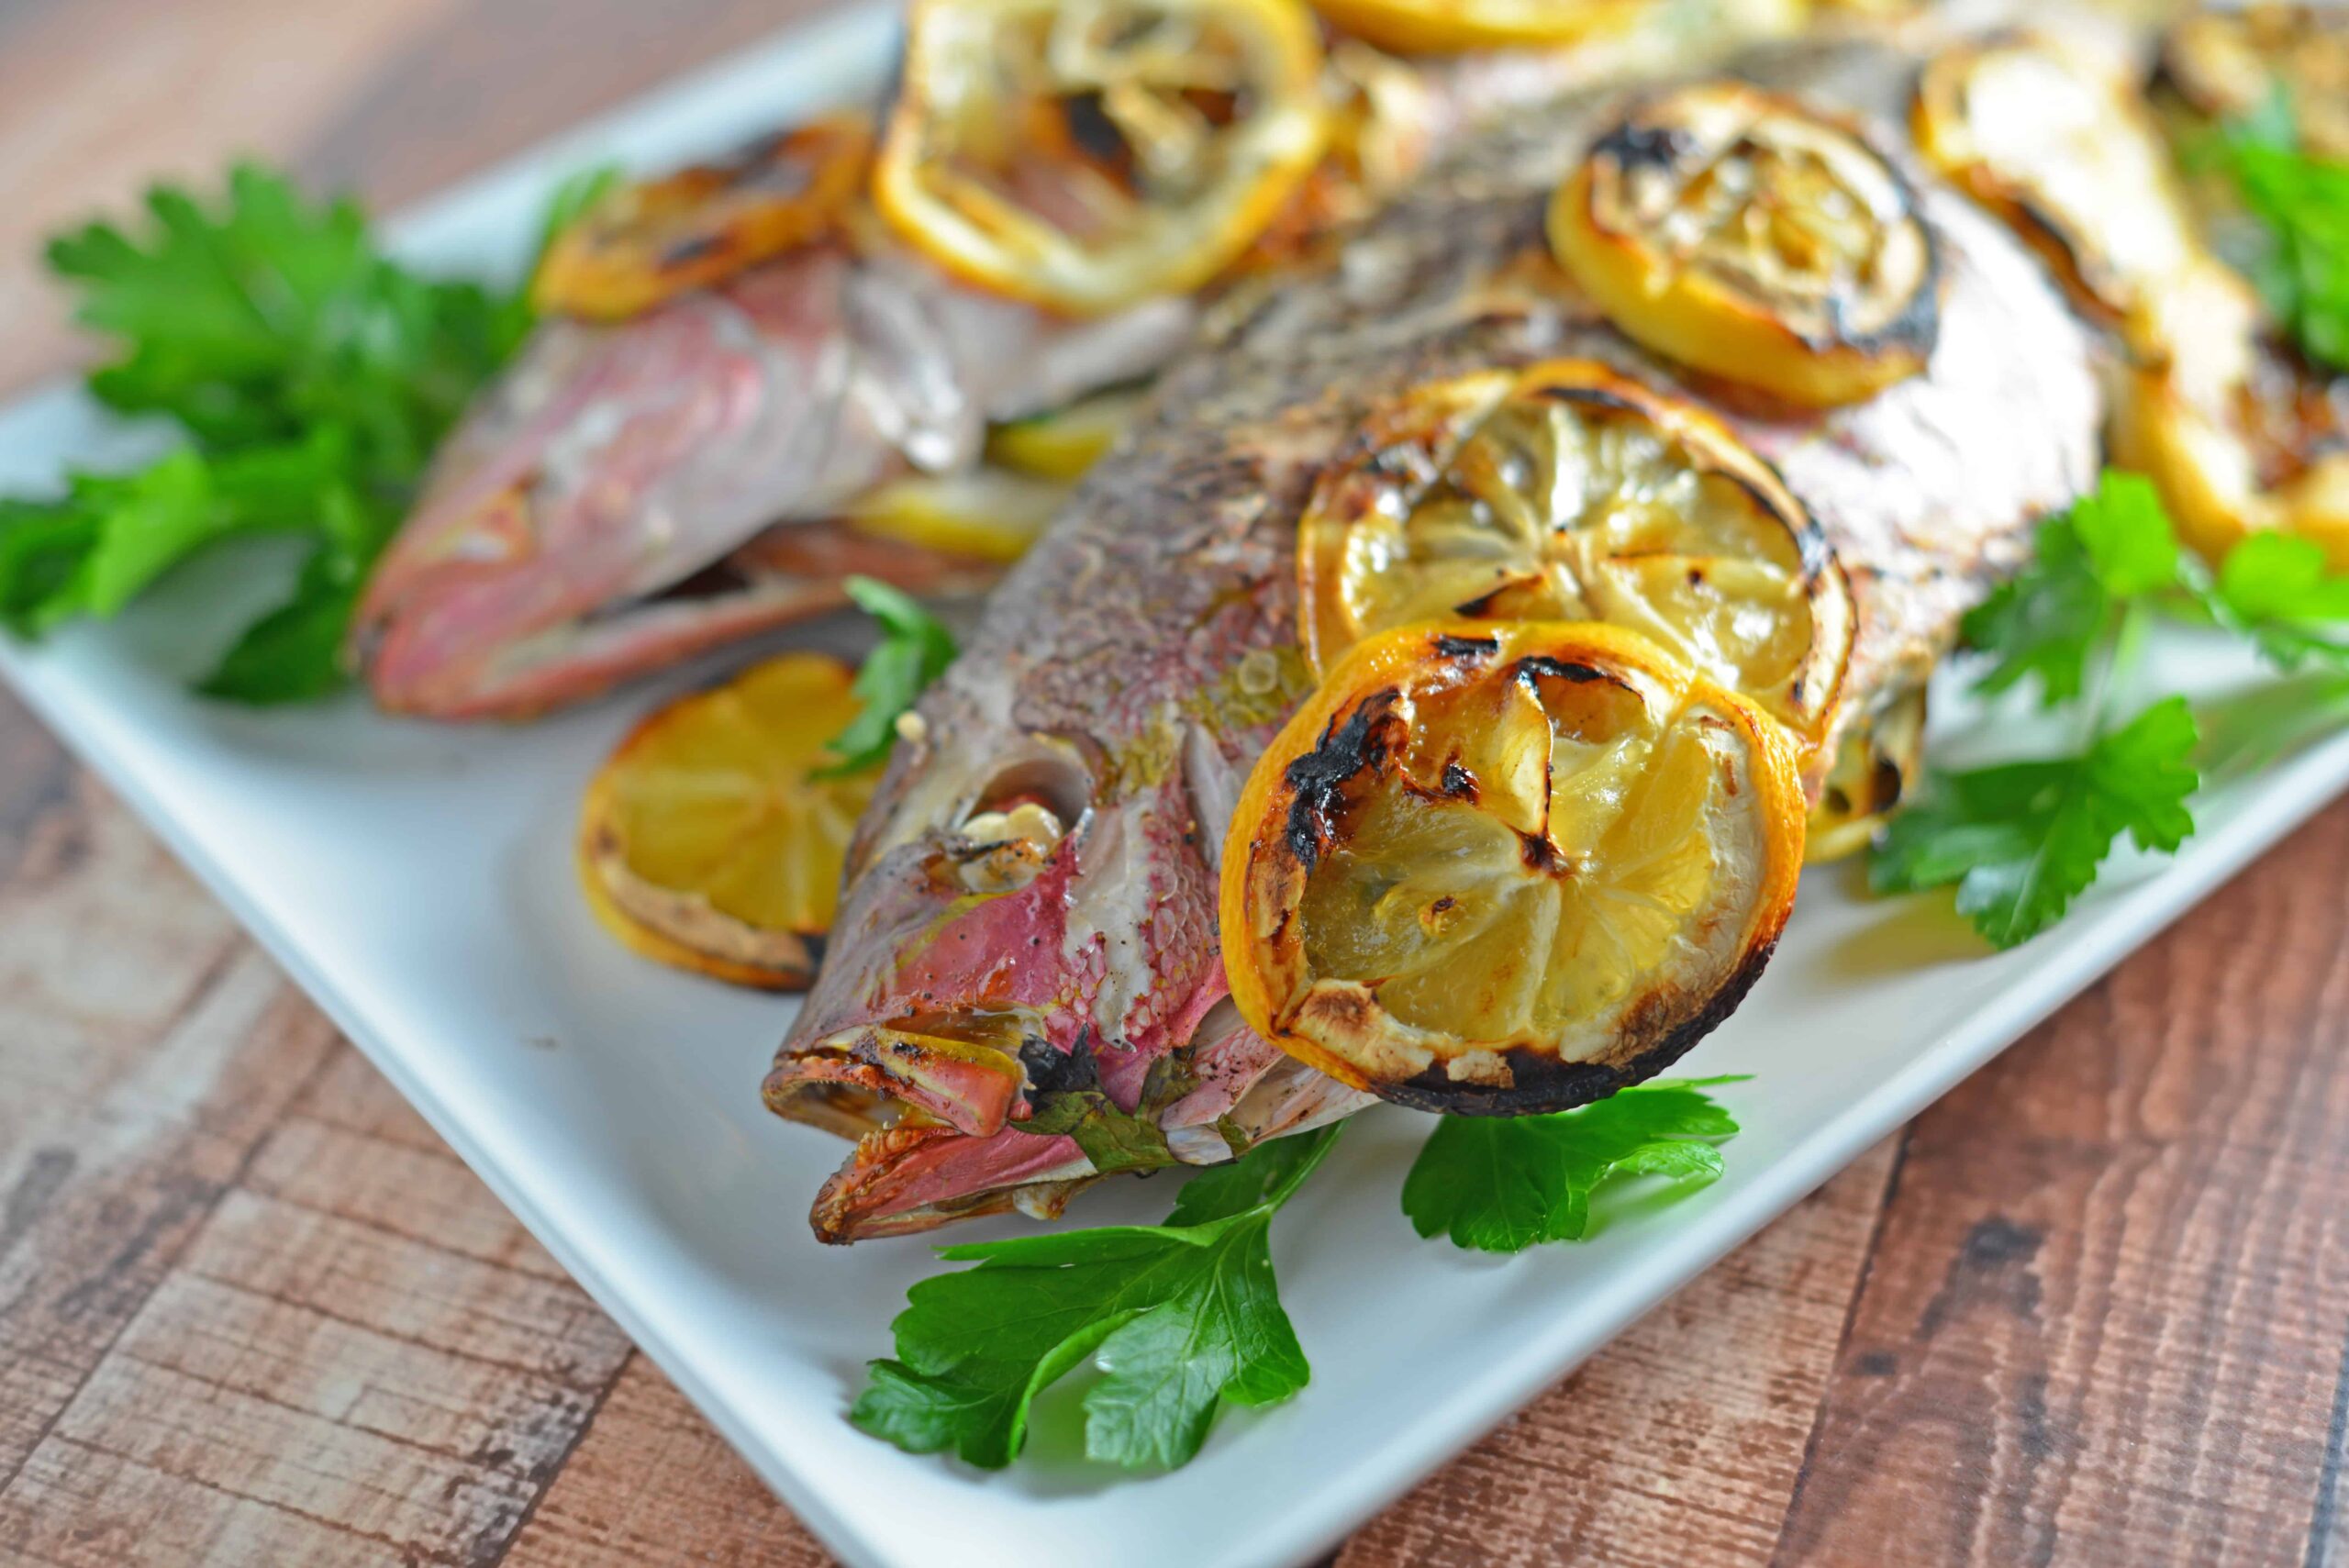 https://www.savoryexperiments.com/wp-content/uploads/2012/08/Grilled-Snapper-5-scaled.jpg